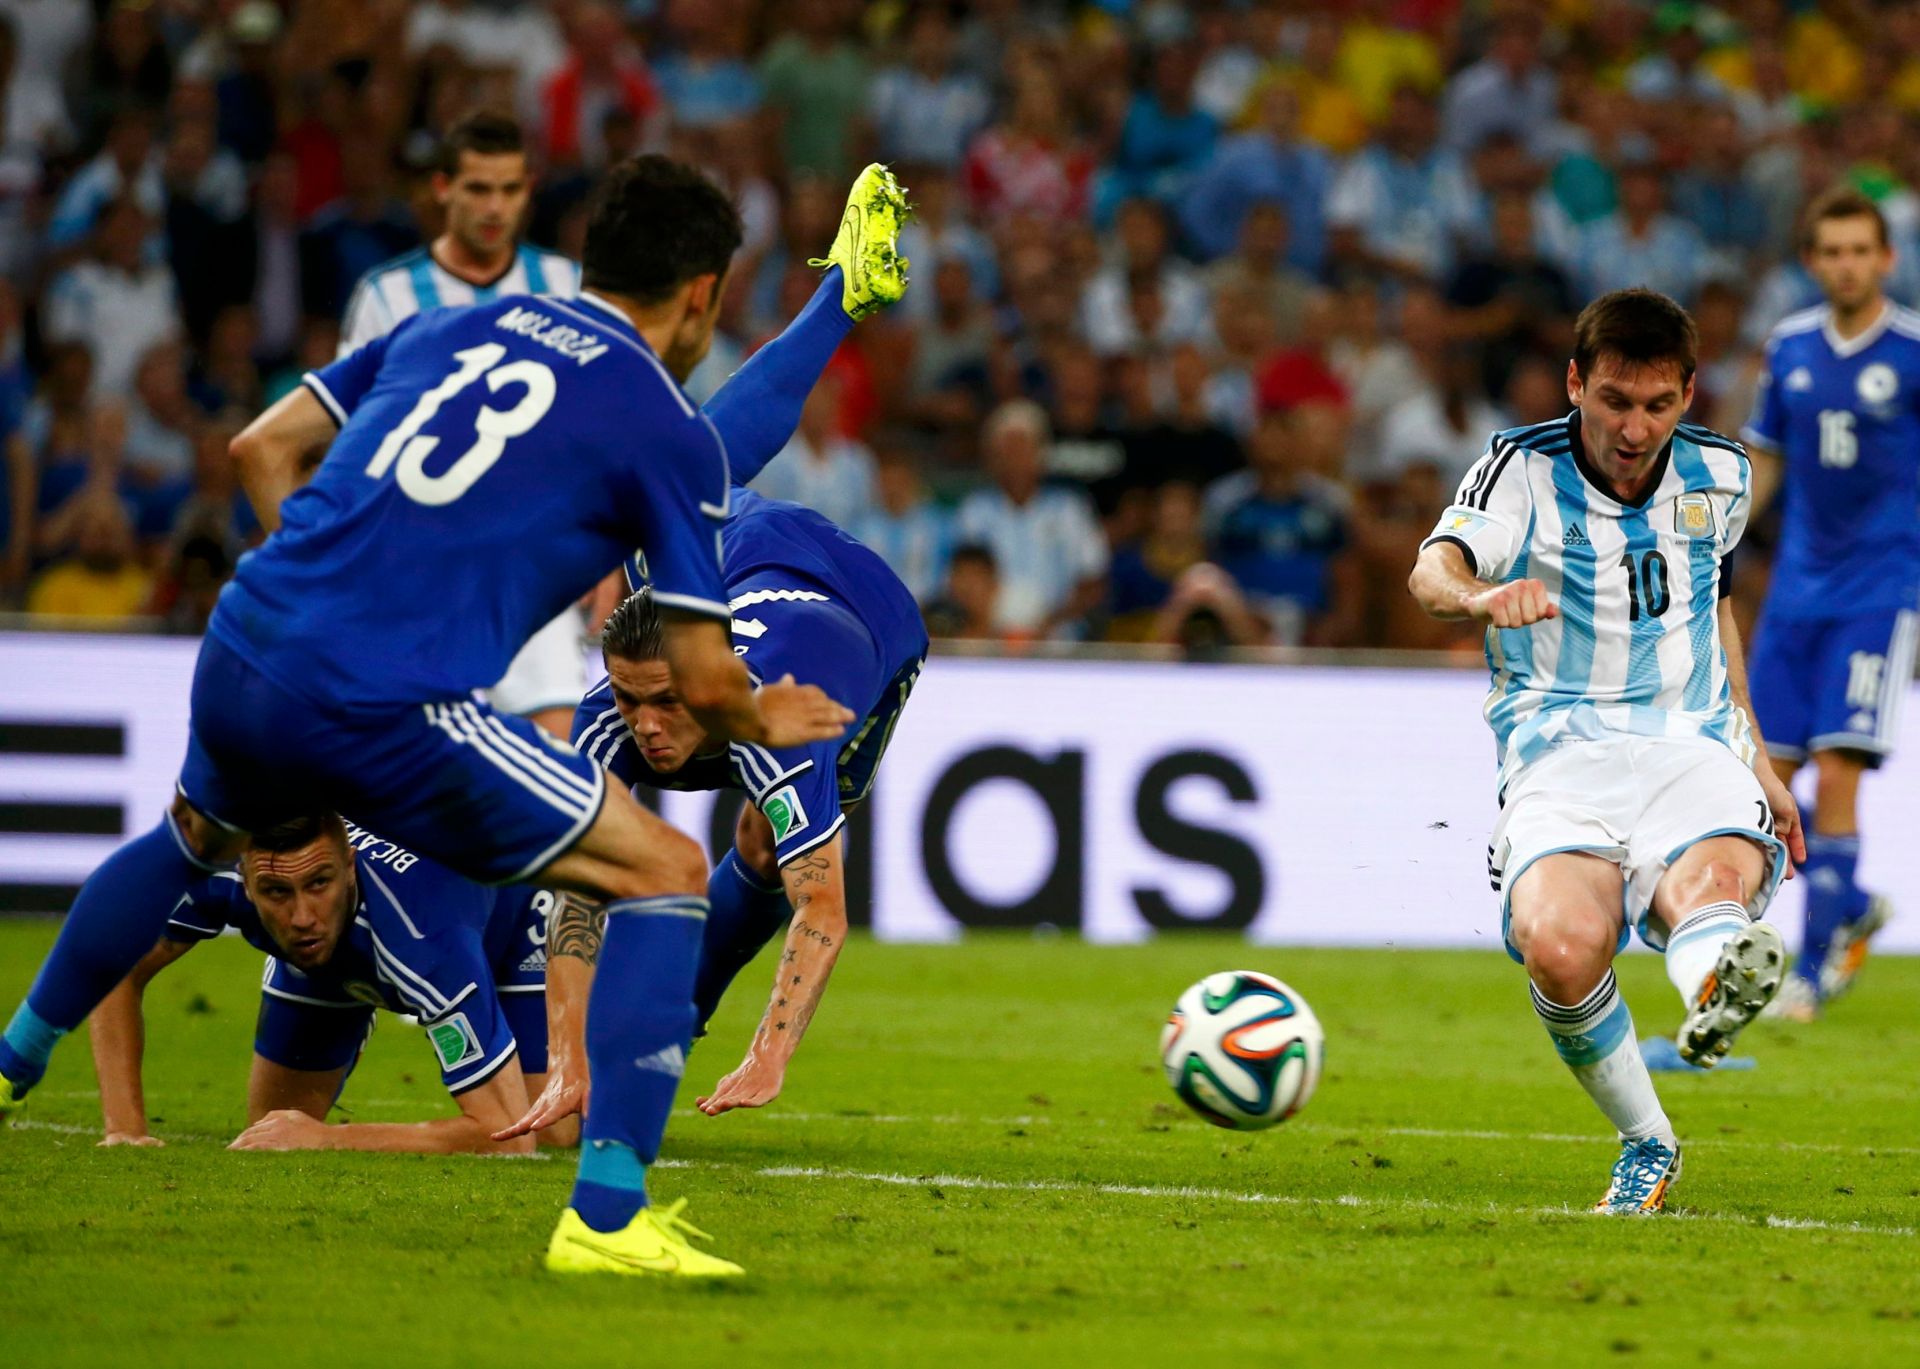 Argentina's Lionel Messi scores a goal during the 2014 World Cup Group